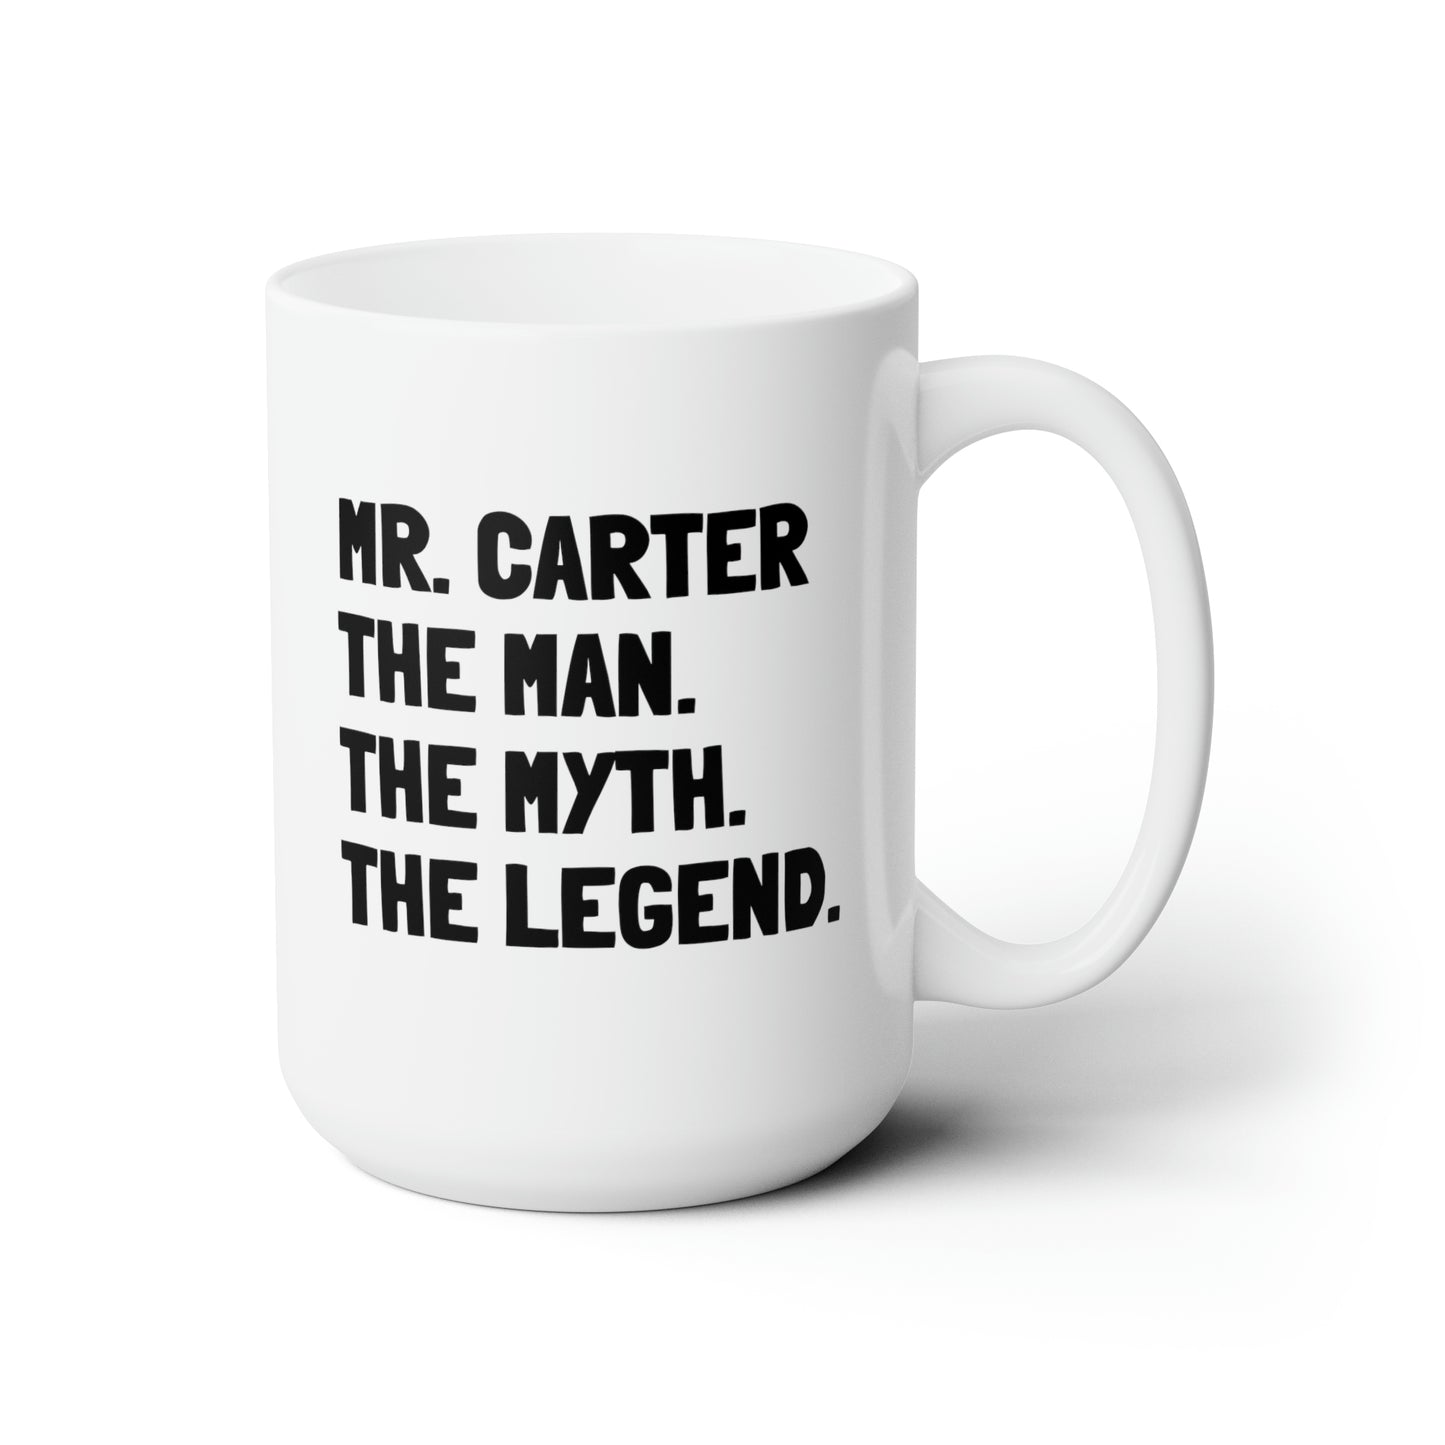 Mr. Carter The Man. The Myth. The Legend. 15oz white funny large coffee mug gift for male teacher end of year appreciation custom name waveywares wavey wares wavywares wavy wares